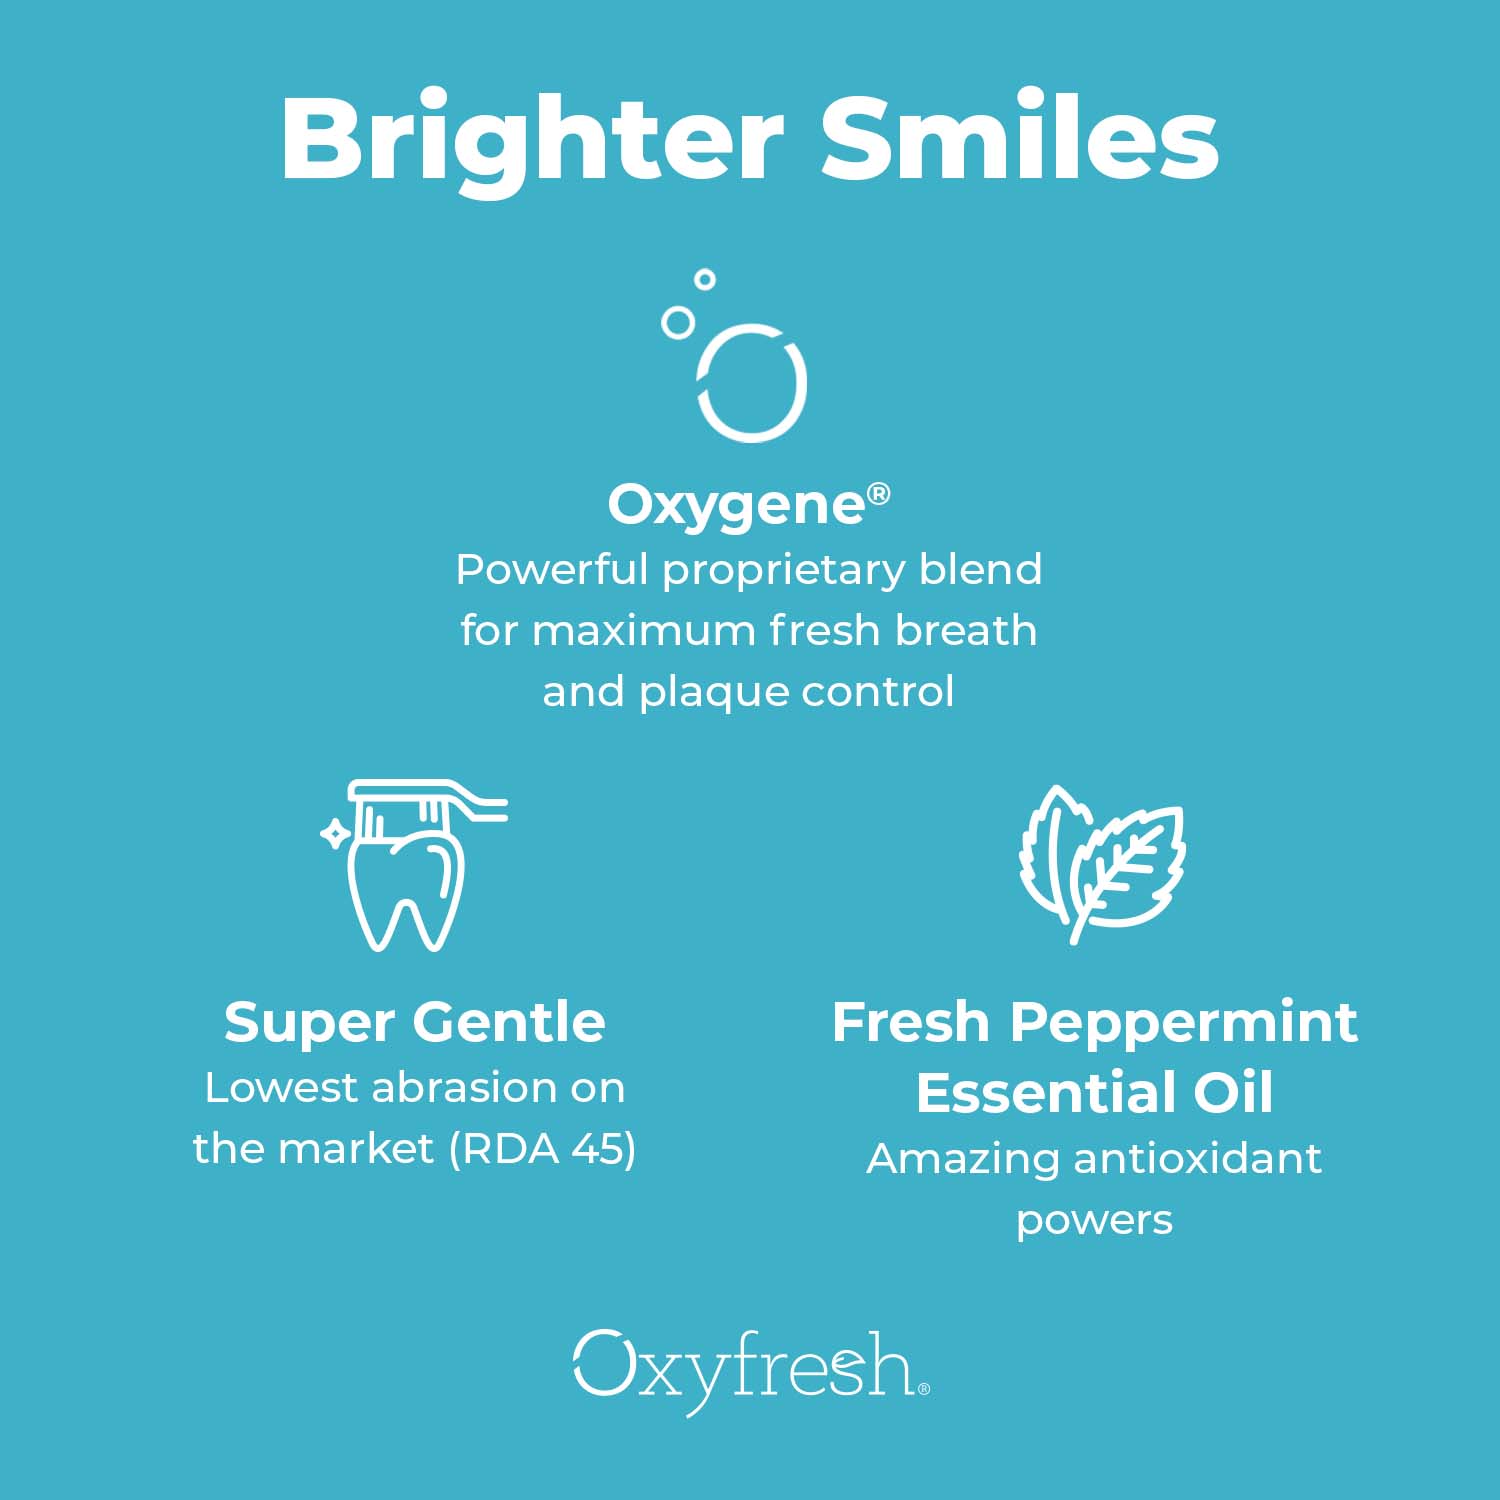 oxyfresh-pro-formula-toothpaste-brighter-smiles-oxygene-super-gentle-and-fresh-peppermint-essential-oil